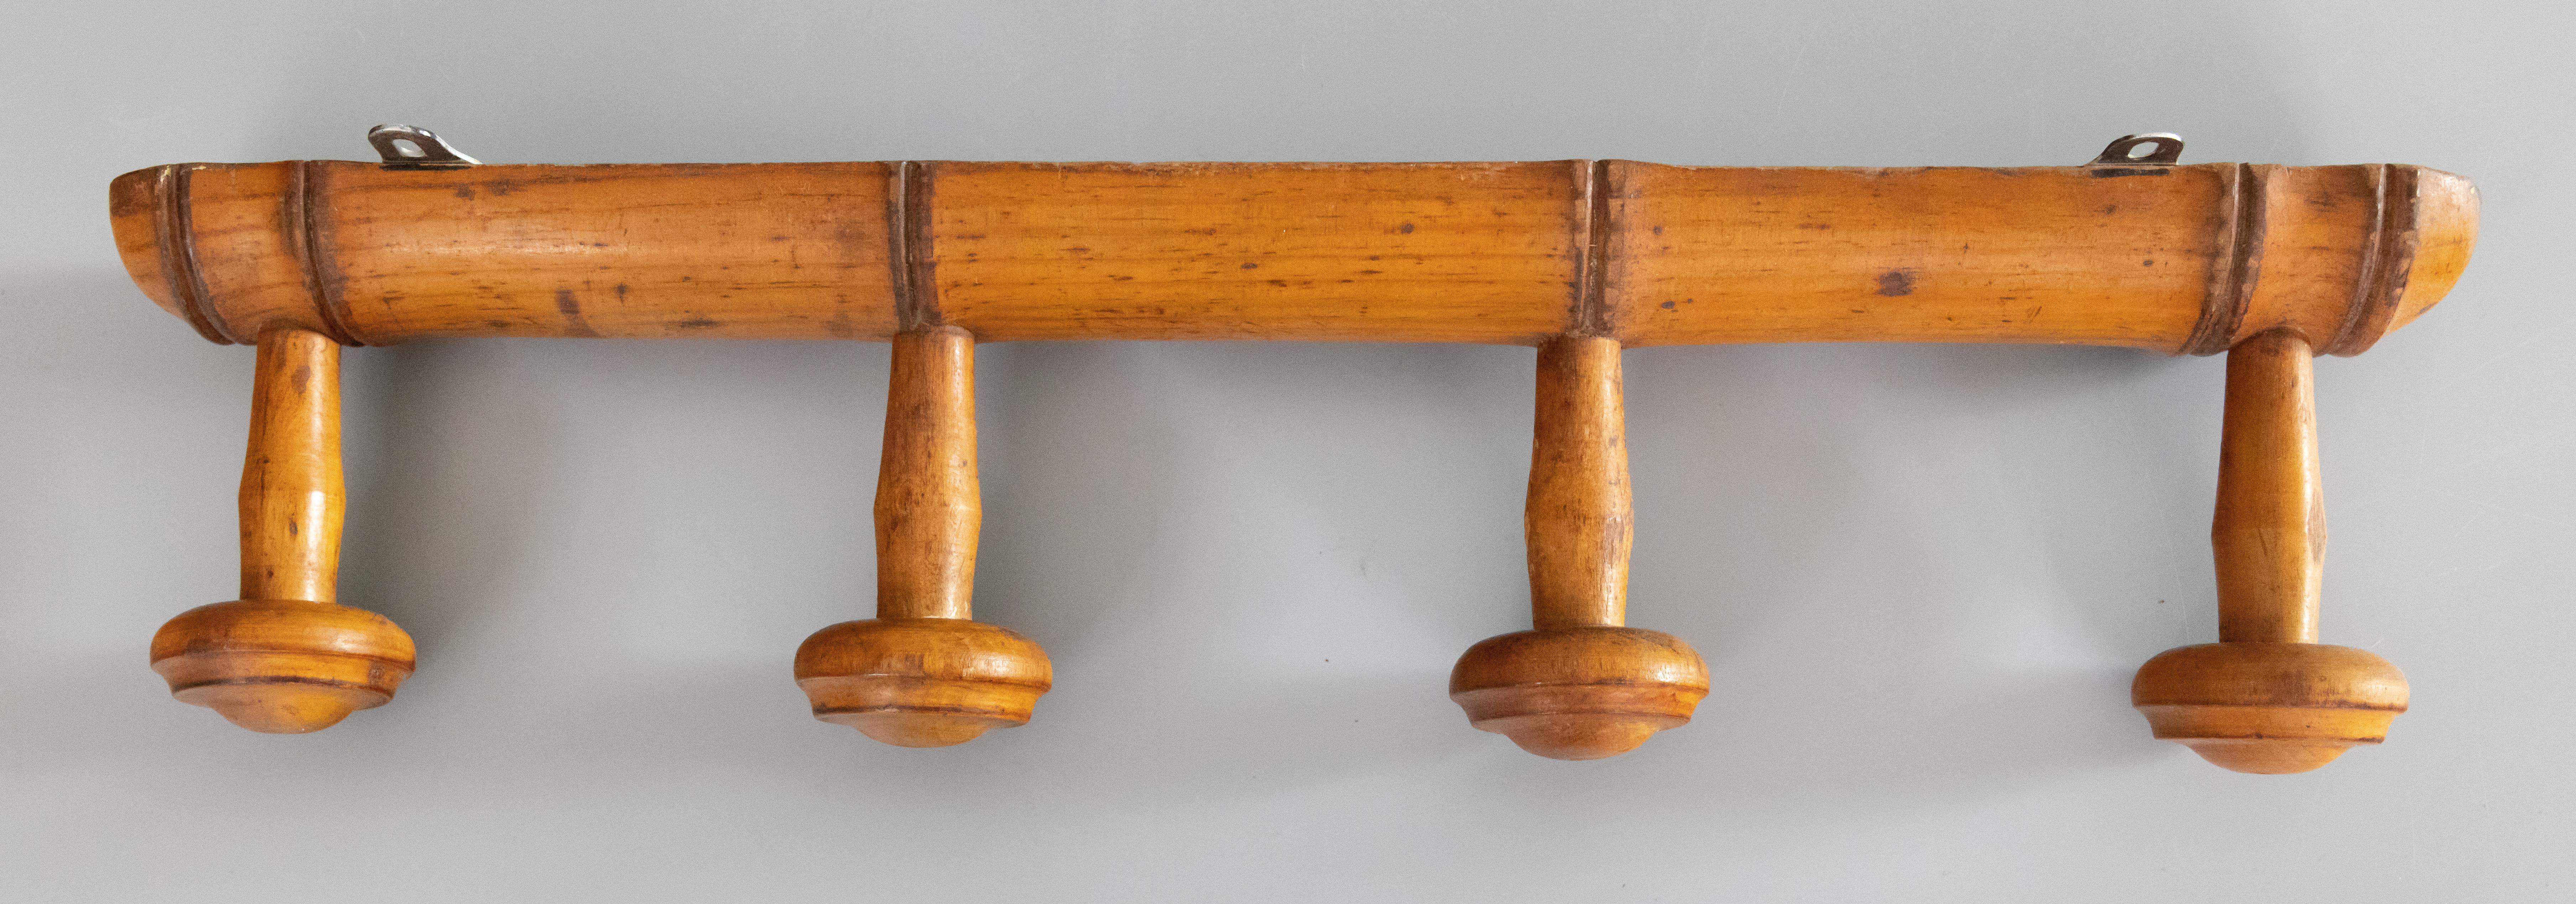 20th Century Antique French Faux Bamboo Carved Coat & Hat Rack, circa 1920